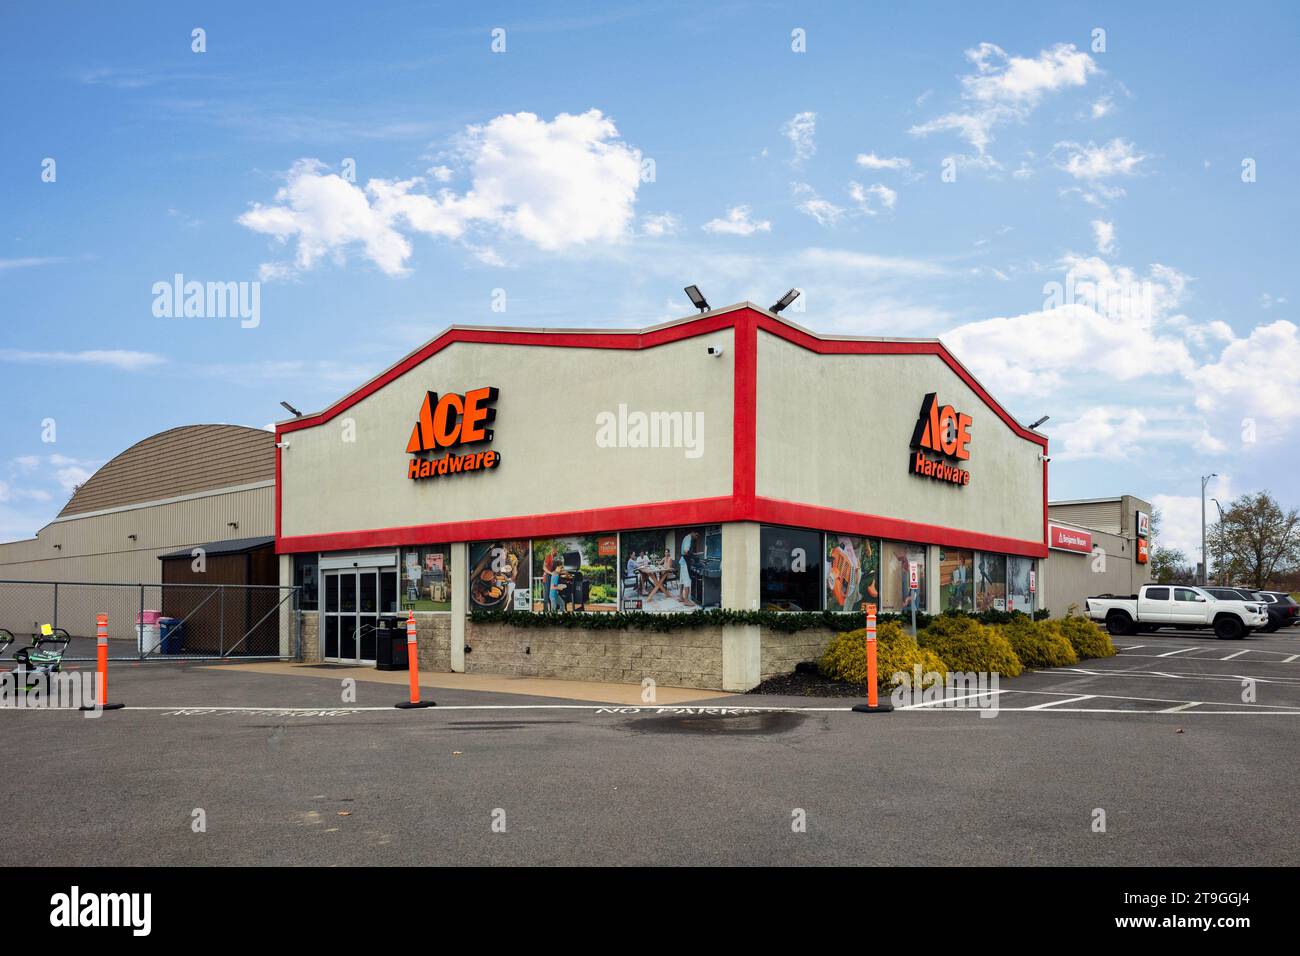 Rome, New York - Nov 21, 2023: Wide Landscape View of Ace Hardware Store Building Exterior. Ace Hardware has over 5,300 Locations All over the World a Stock Photo